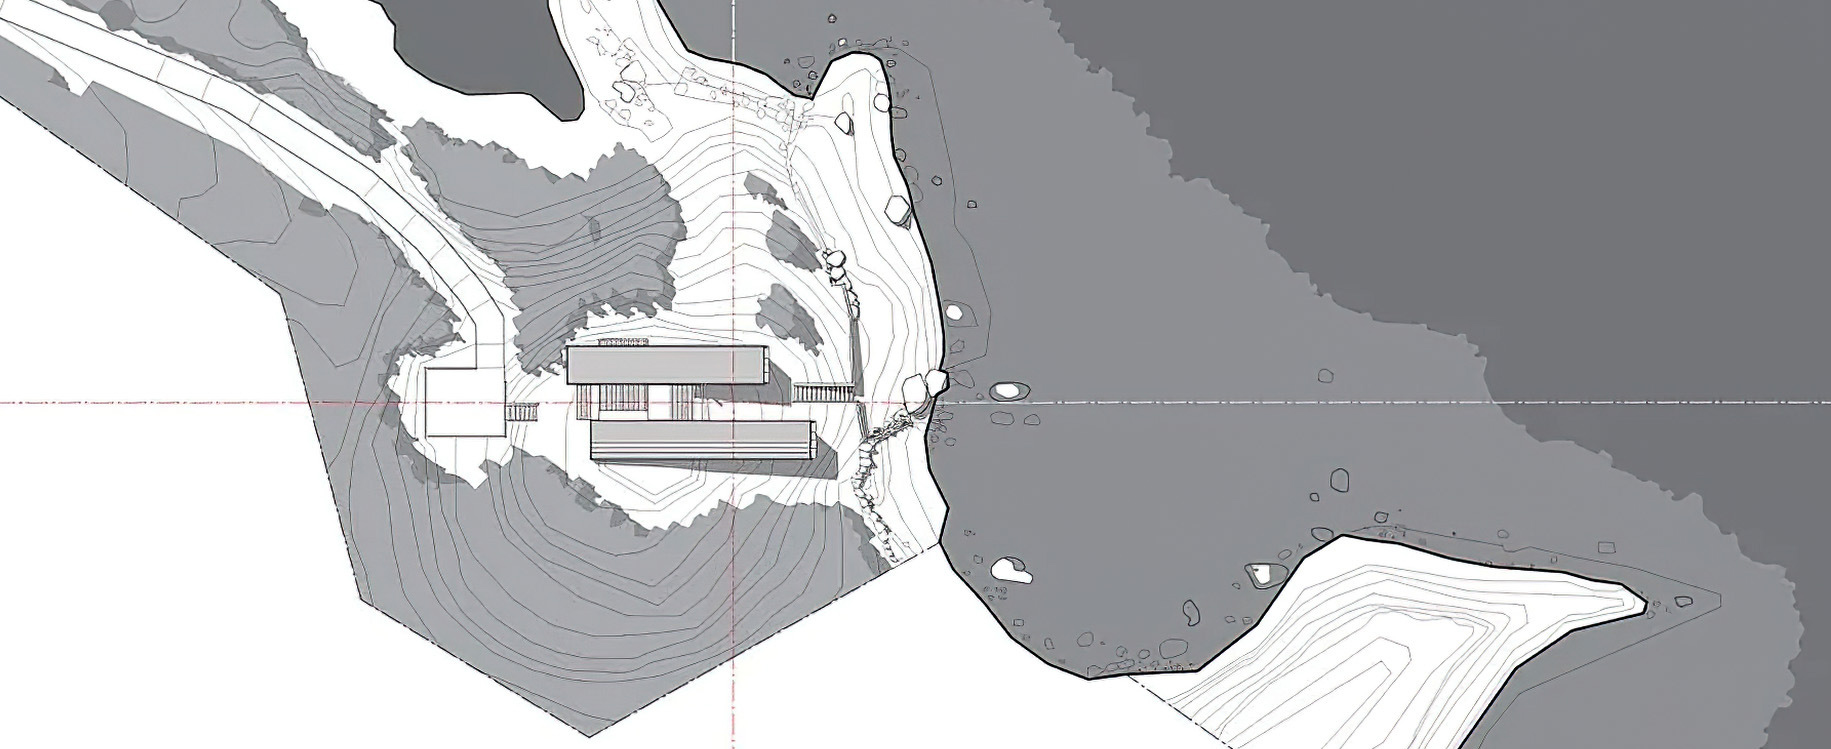 Two Hulls House – Port Mouton, NS, Canada – Site Plan